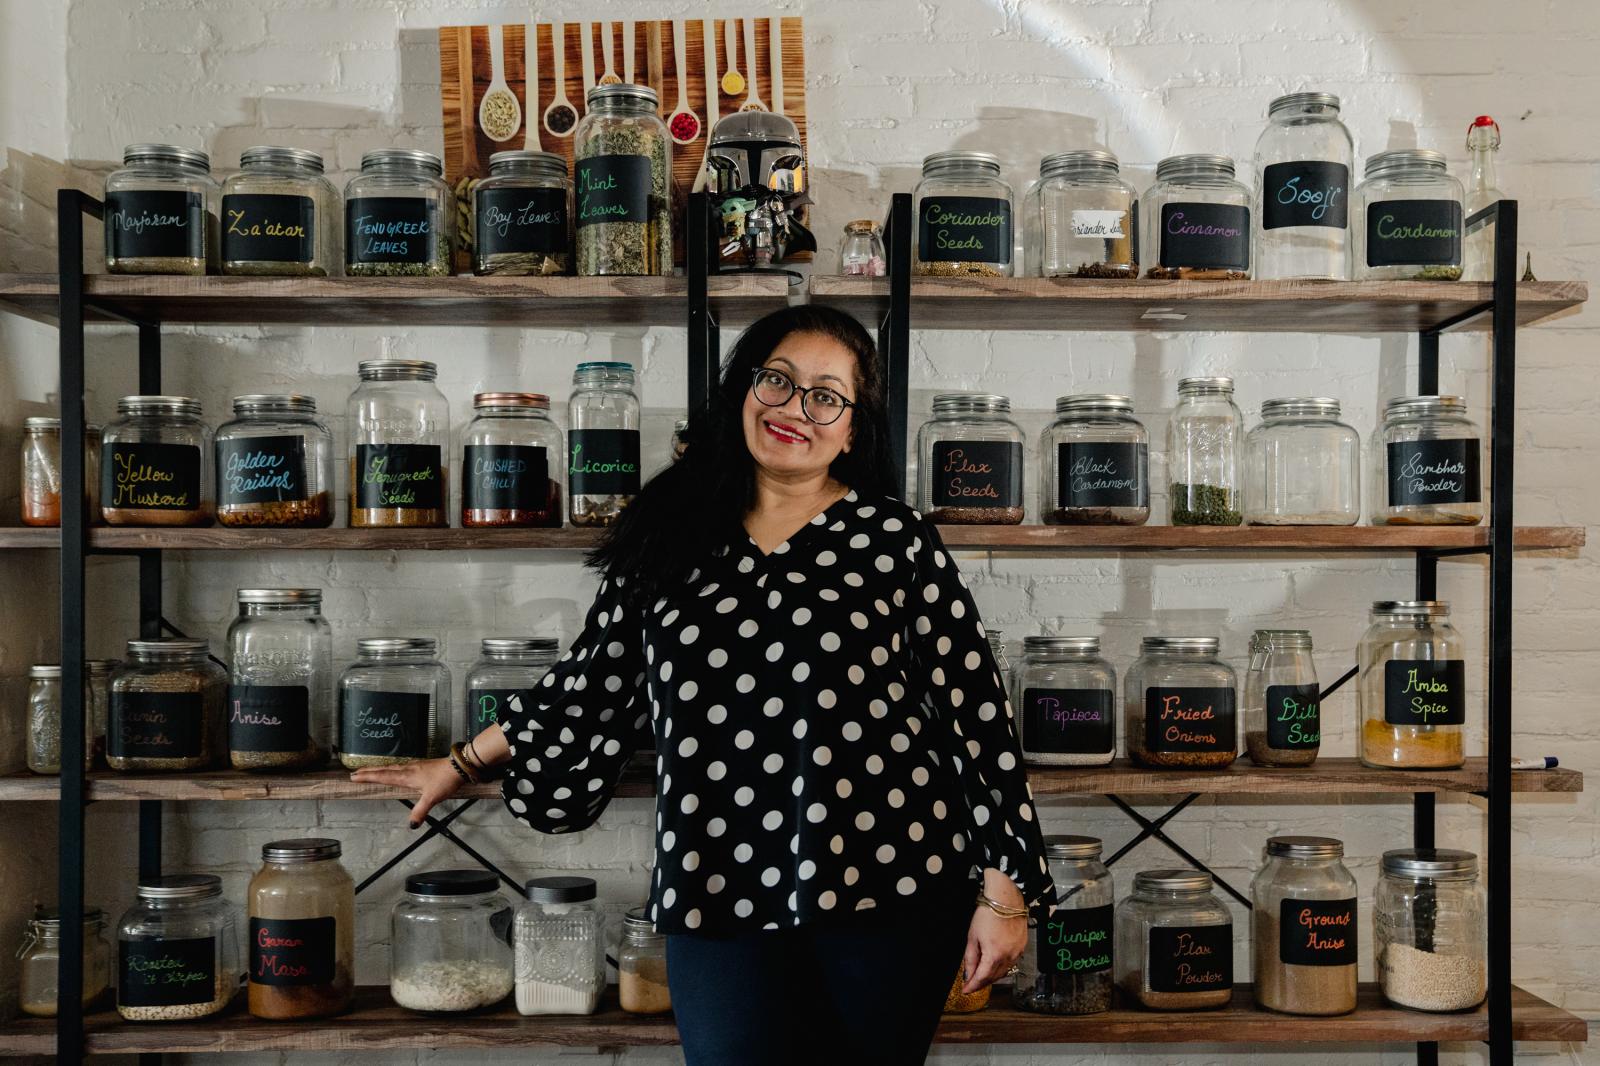 The Washington Post: Feeding the American dream with their Asian heritage - Rani Soudagar, Owner of Spicez, a community Store that...